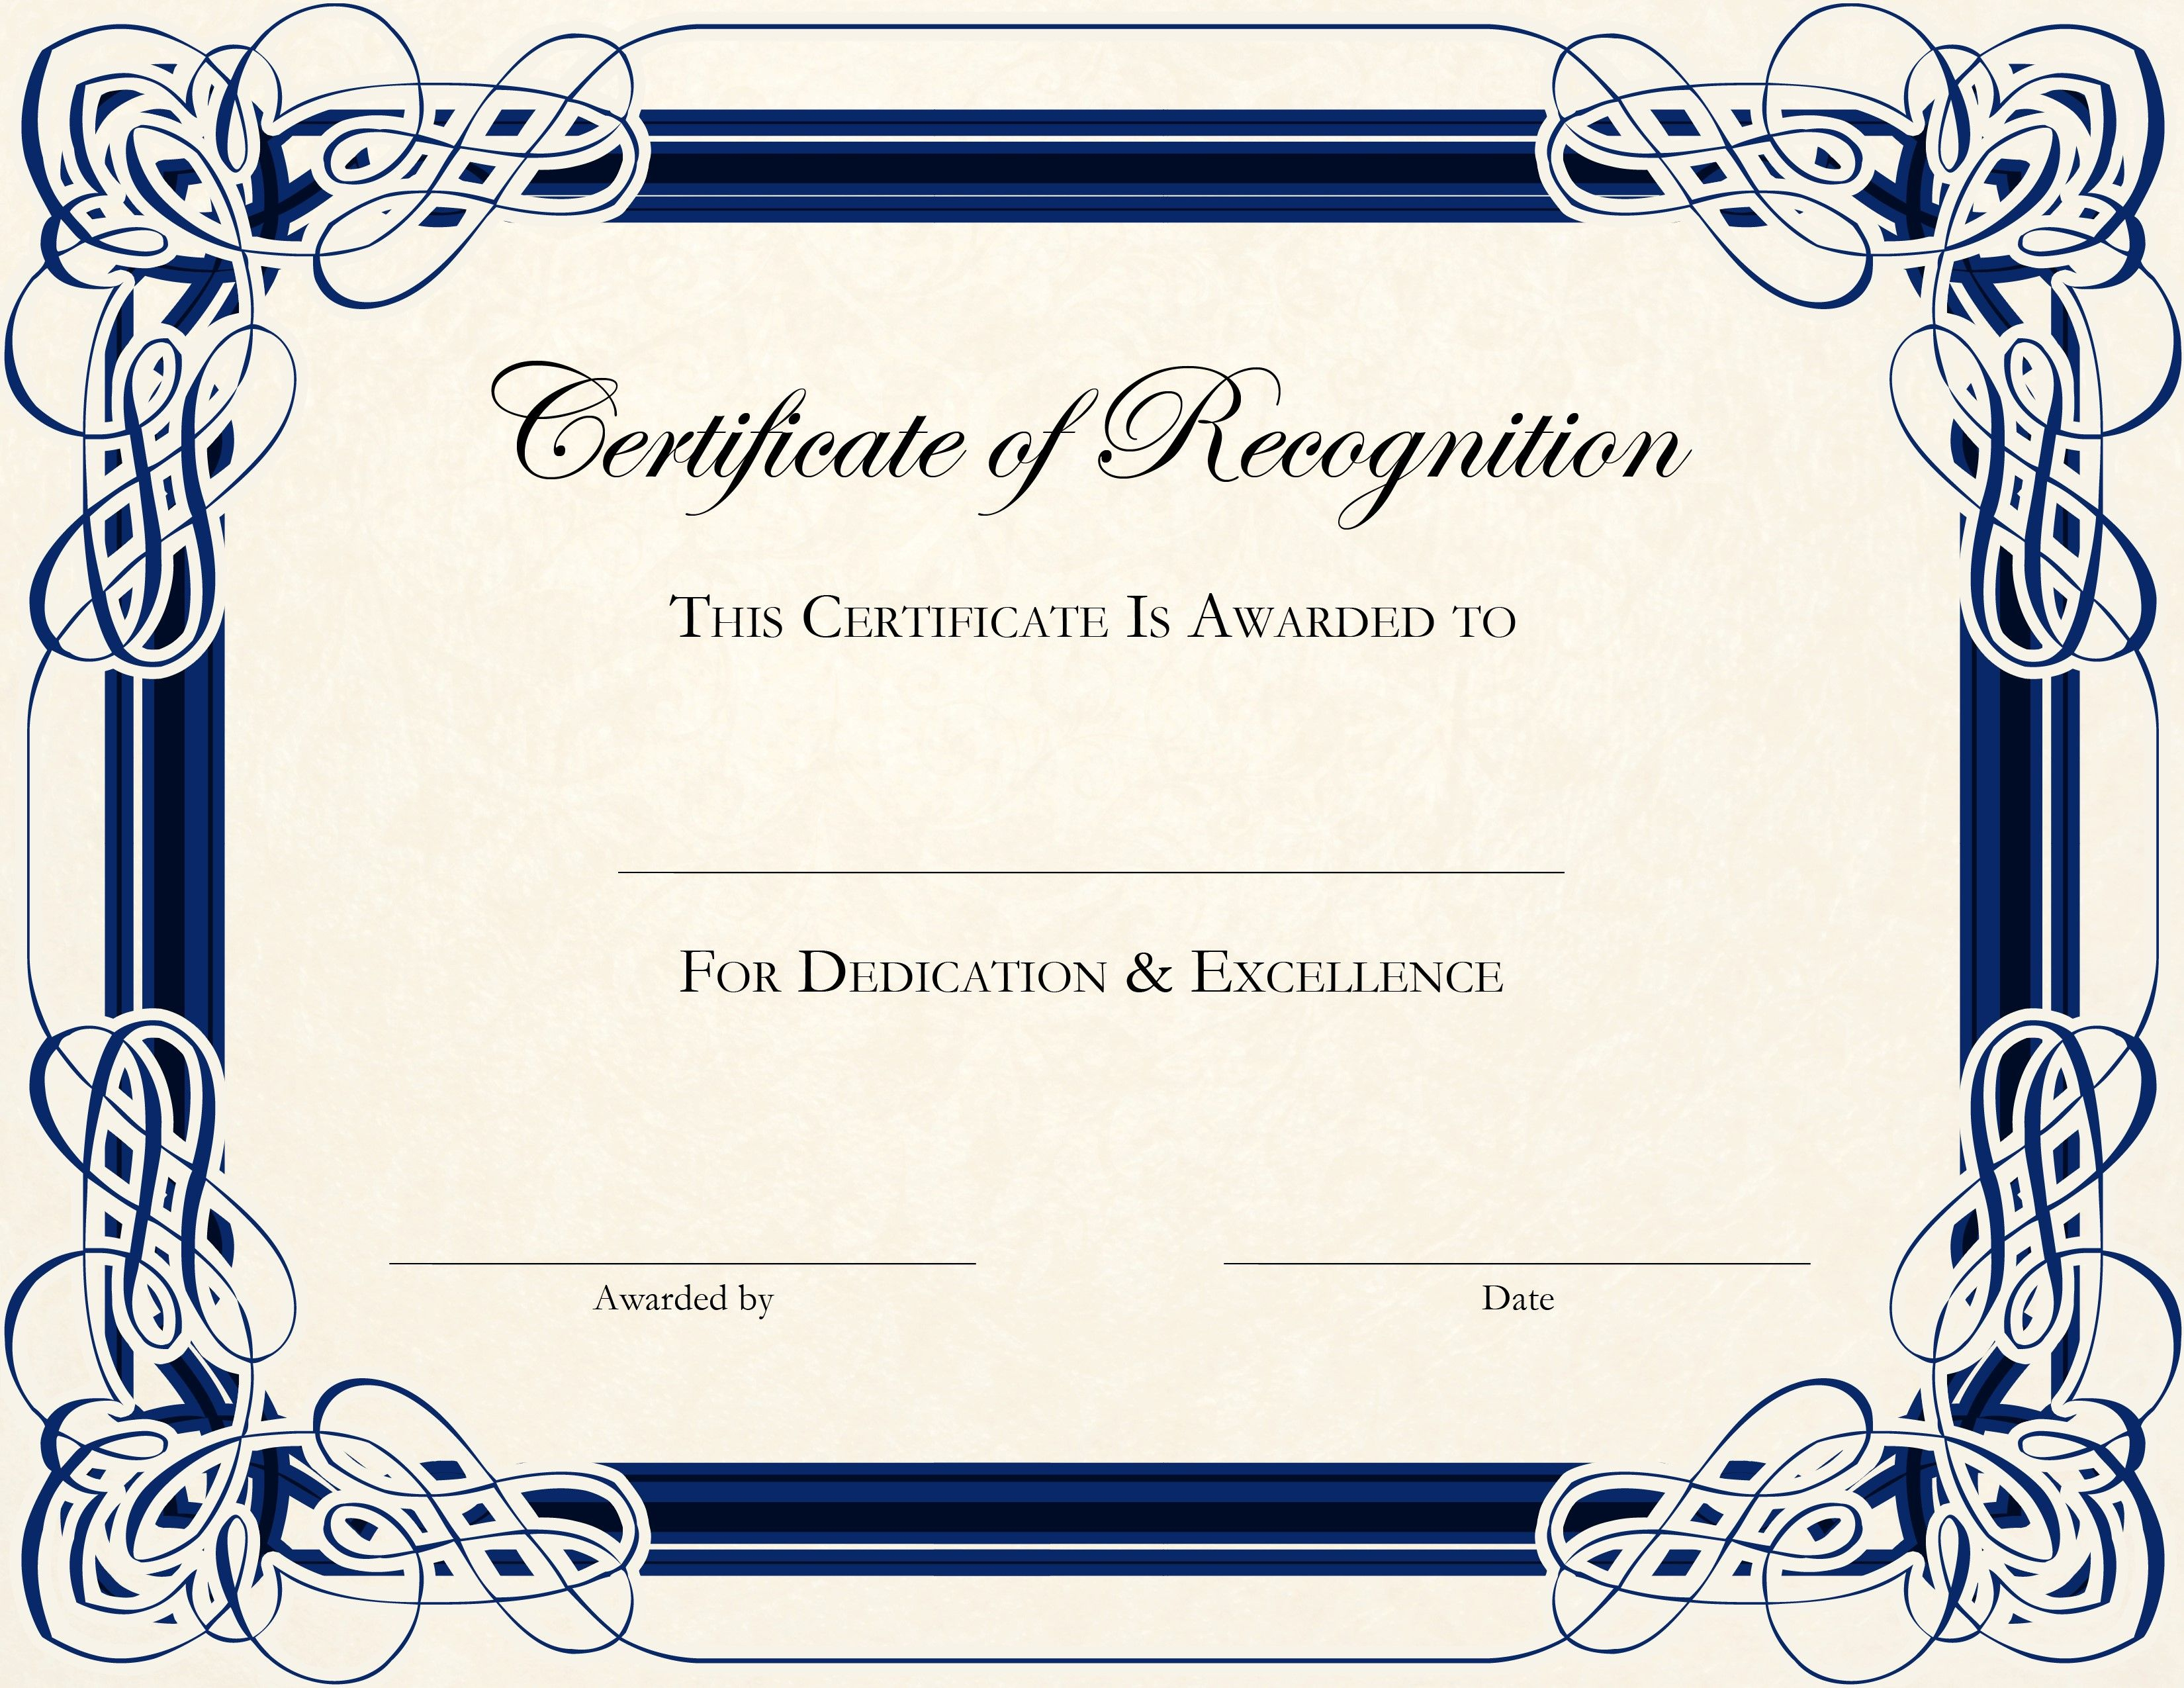 Free Printable Certificate Templates For Teachers | Besttemplate123 - Free Printable Certificates And Awards